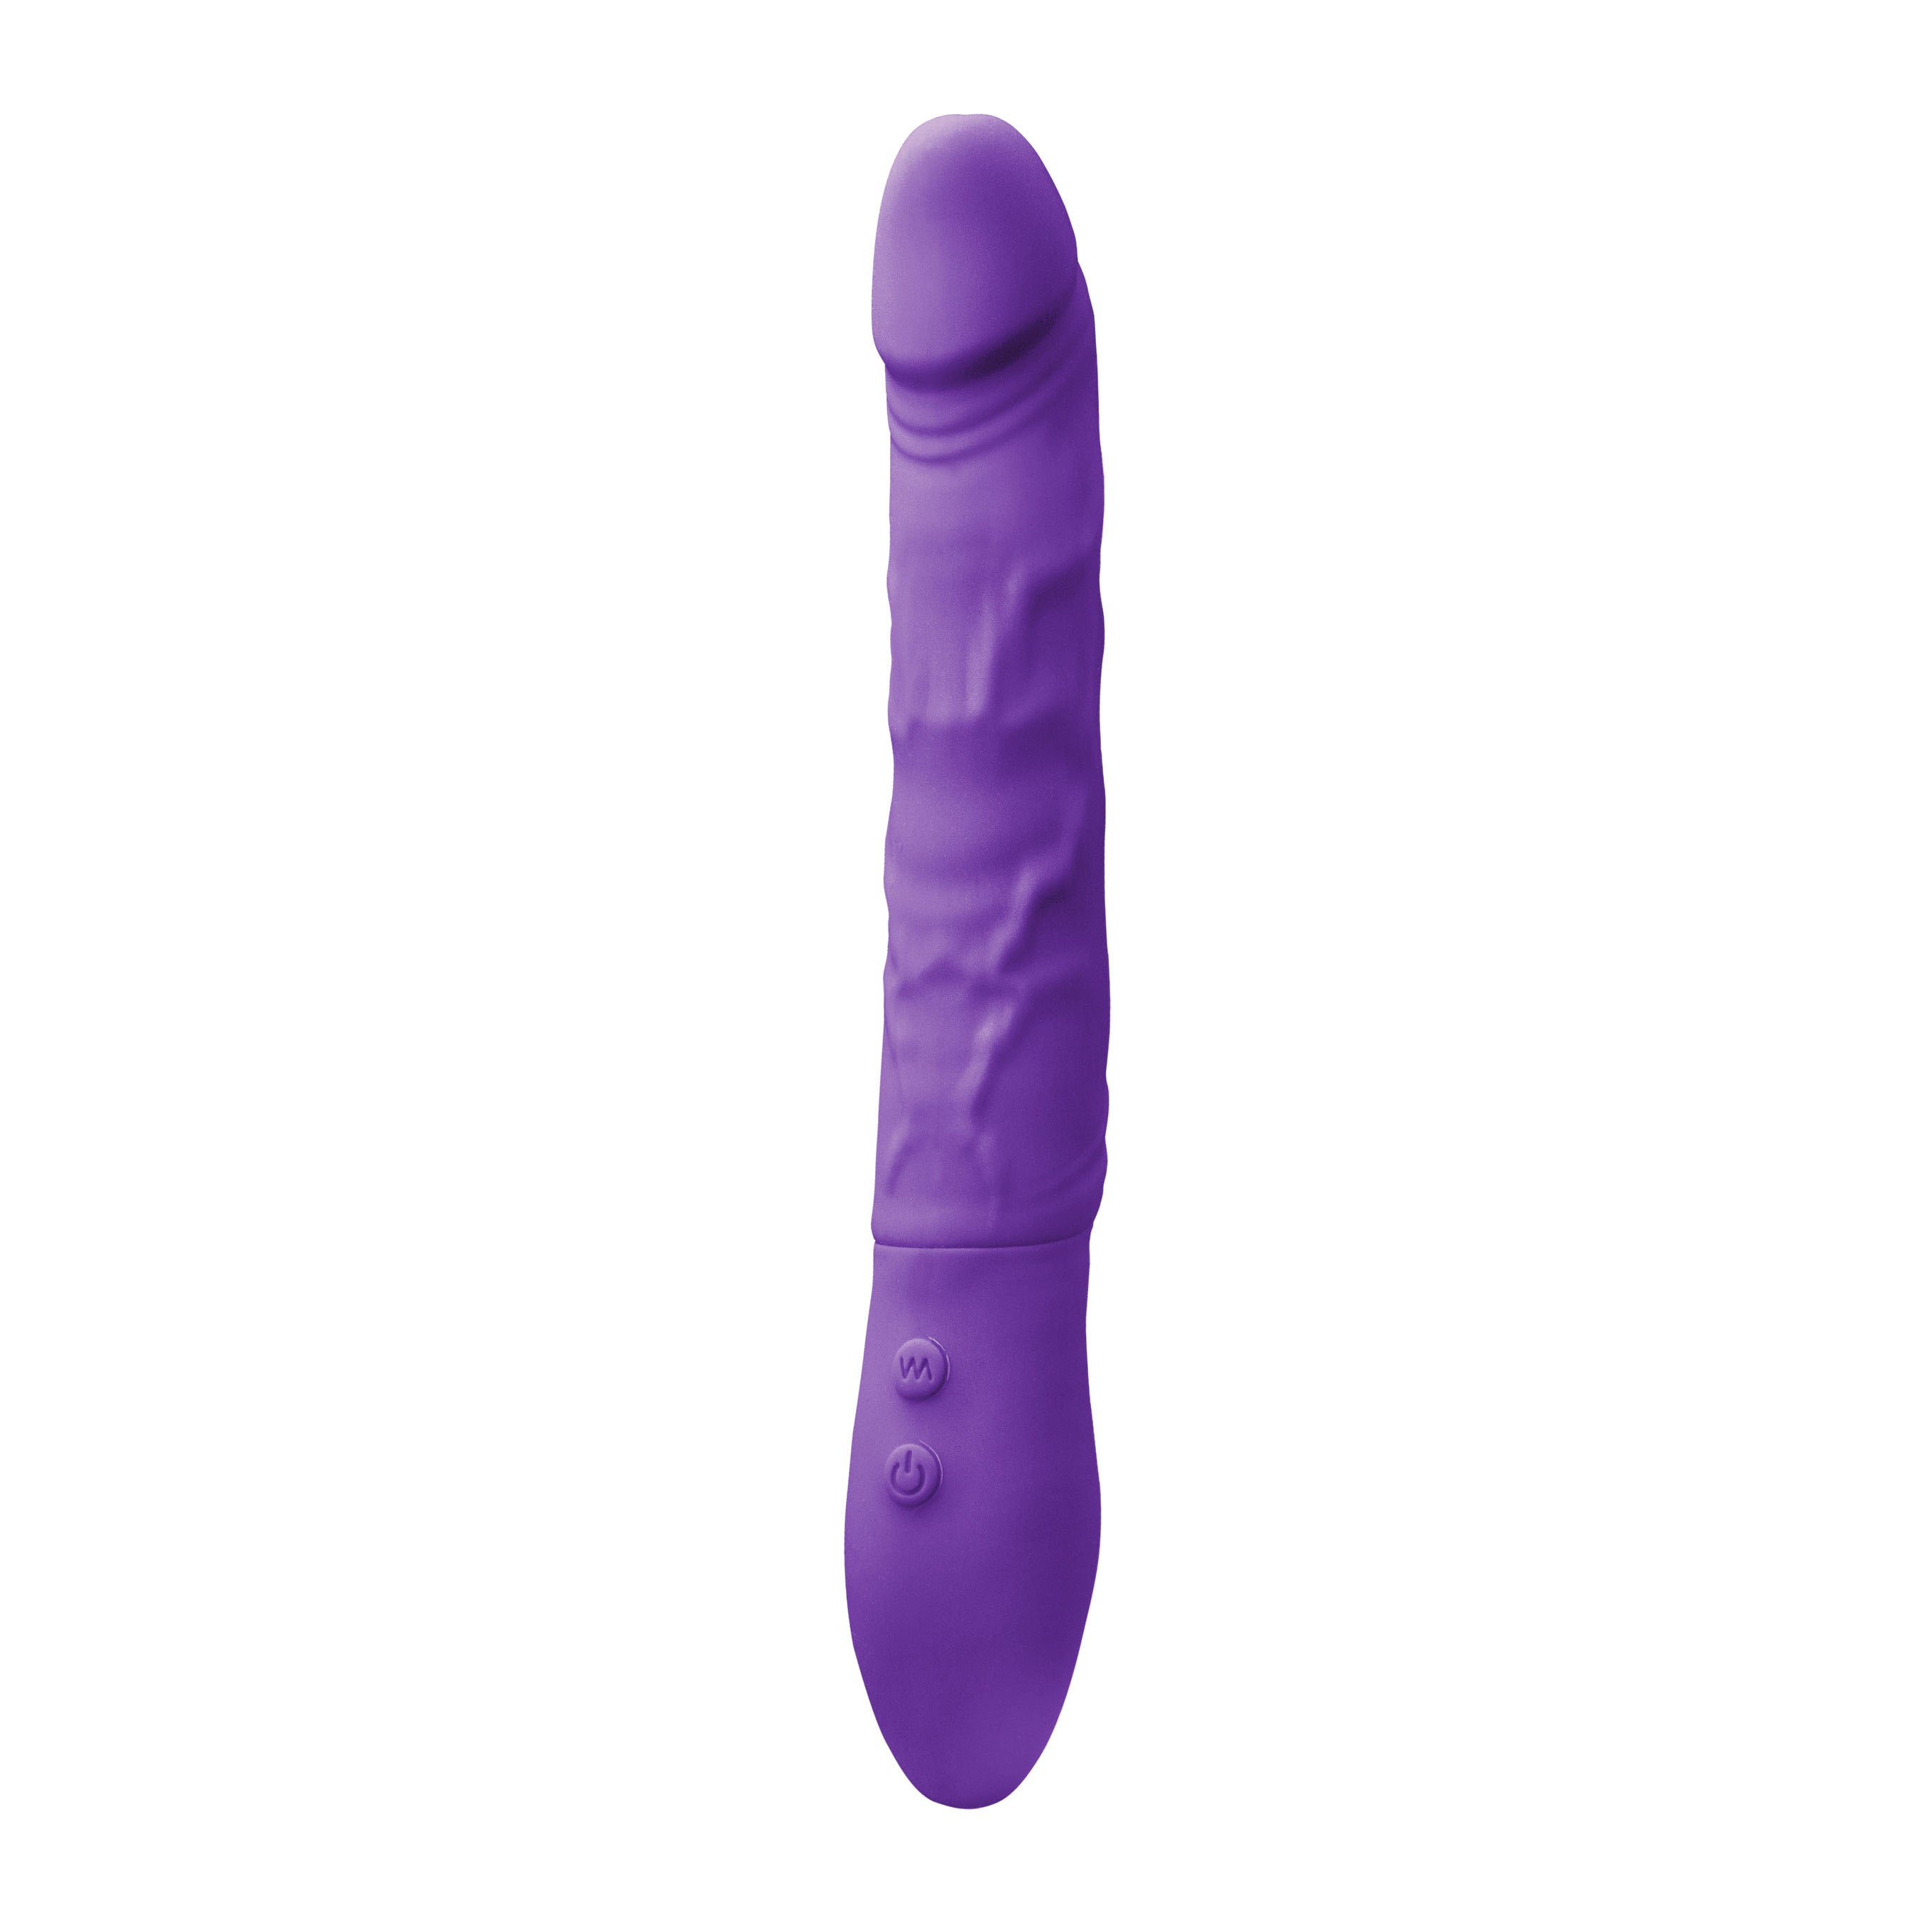 Vibrators, Sex Toy Kits and Sex Toys at Cloud9Adults - Inya Rechargeable Petite Twister Vibe Purple - Buy Sex Toys Online